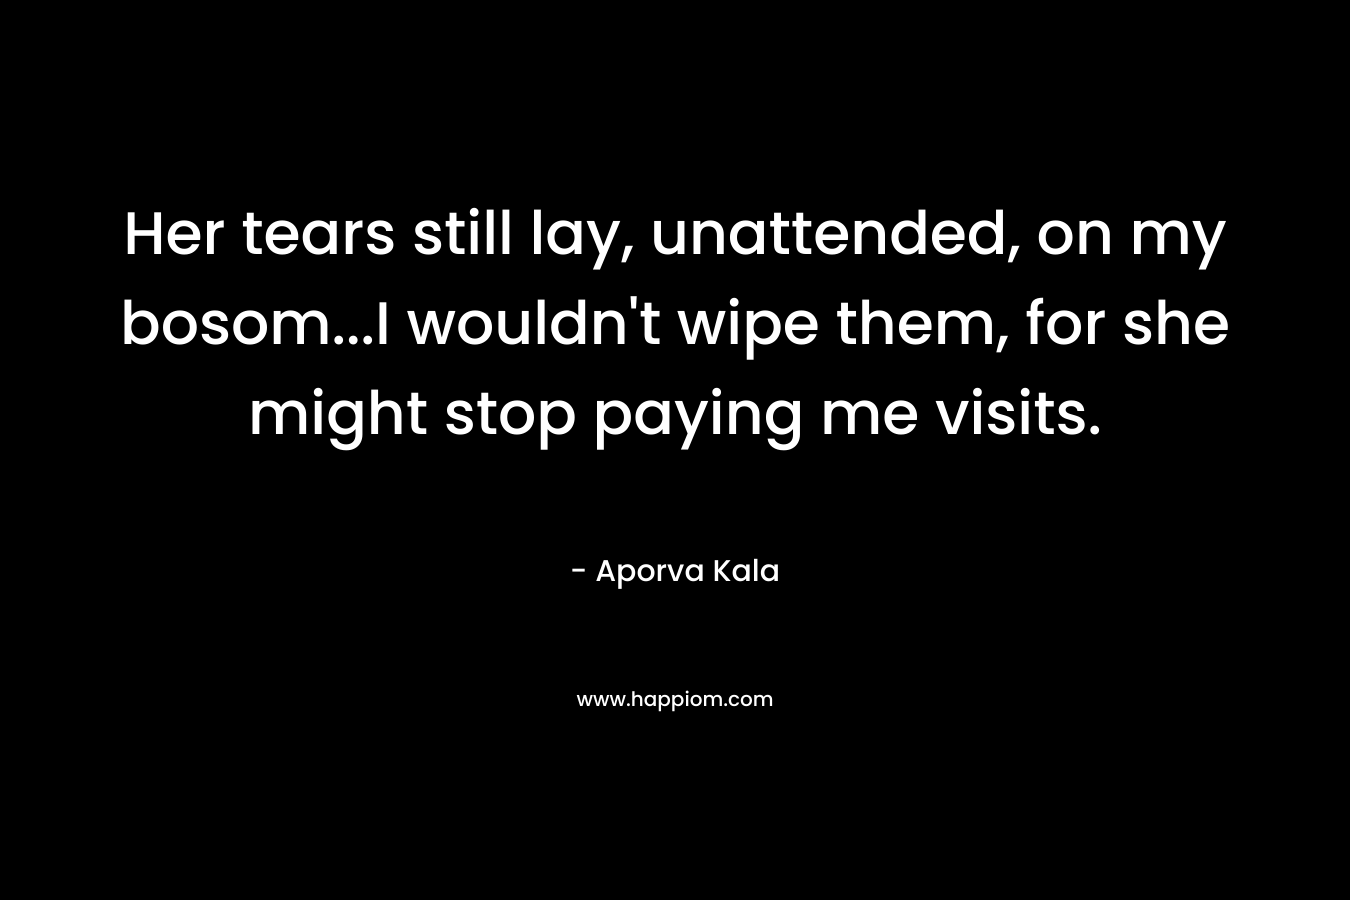 Her tears still lay, unattended, on my bosom...I wouldn't wipe them, for she might stop paying me visits.